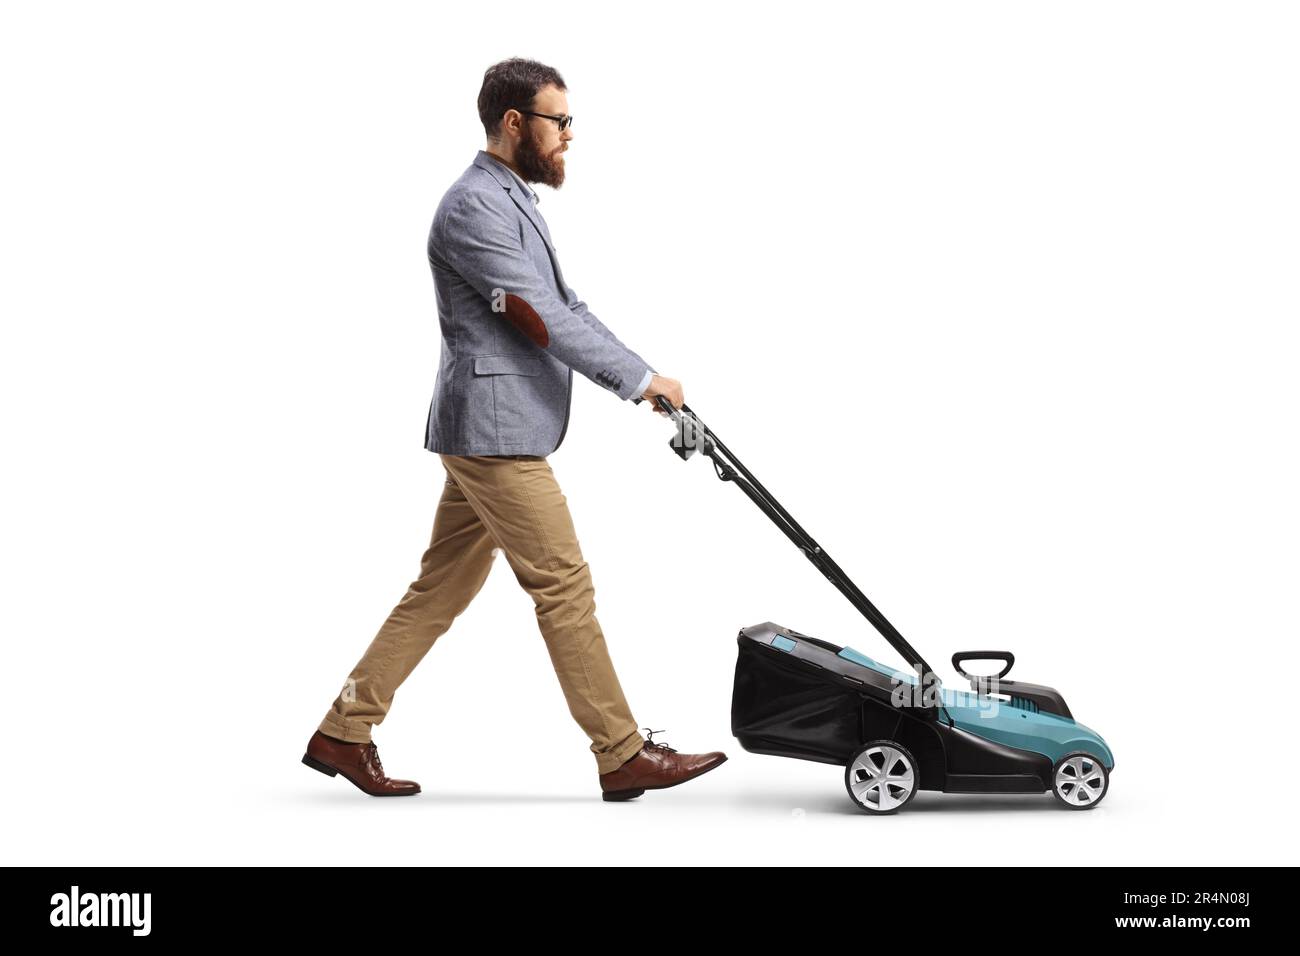 Full length profile shot of a bearded man using a lawnmower isolated on white background Stock Photo